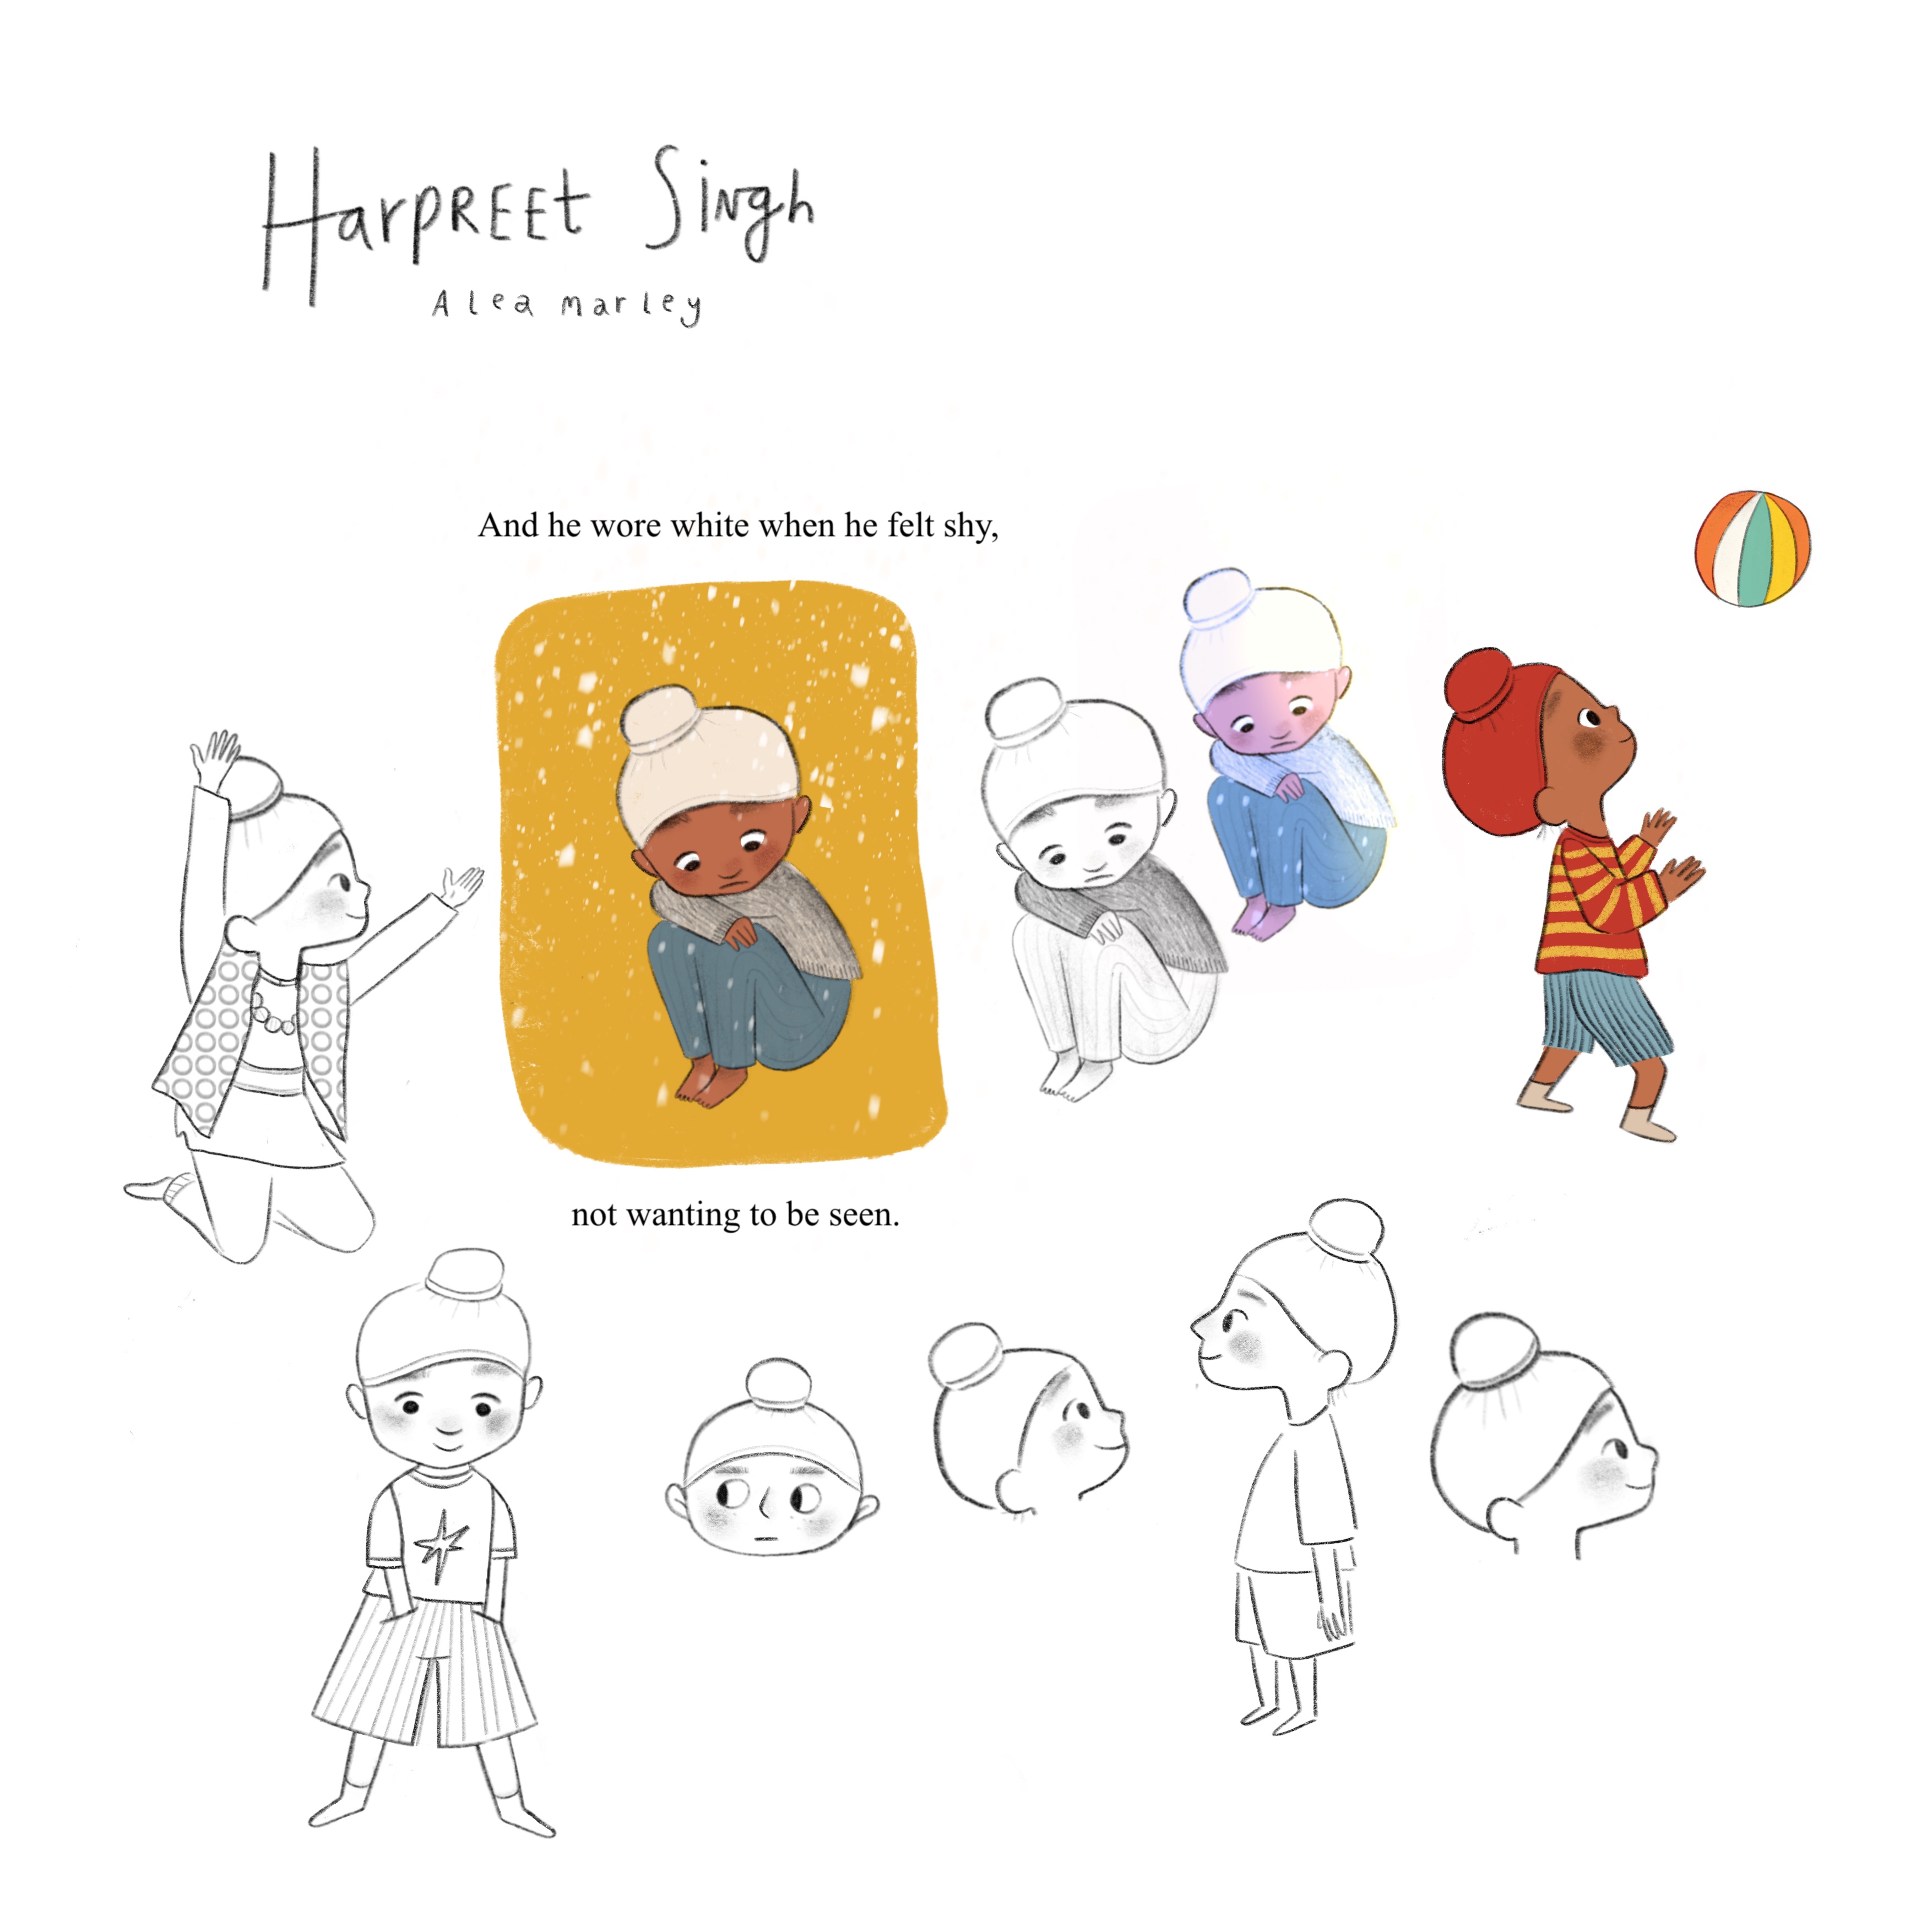 Image shows initial sketches of Harpreet and the patka (small head covering worn by members of the Sikh faith).